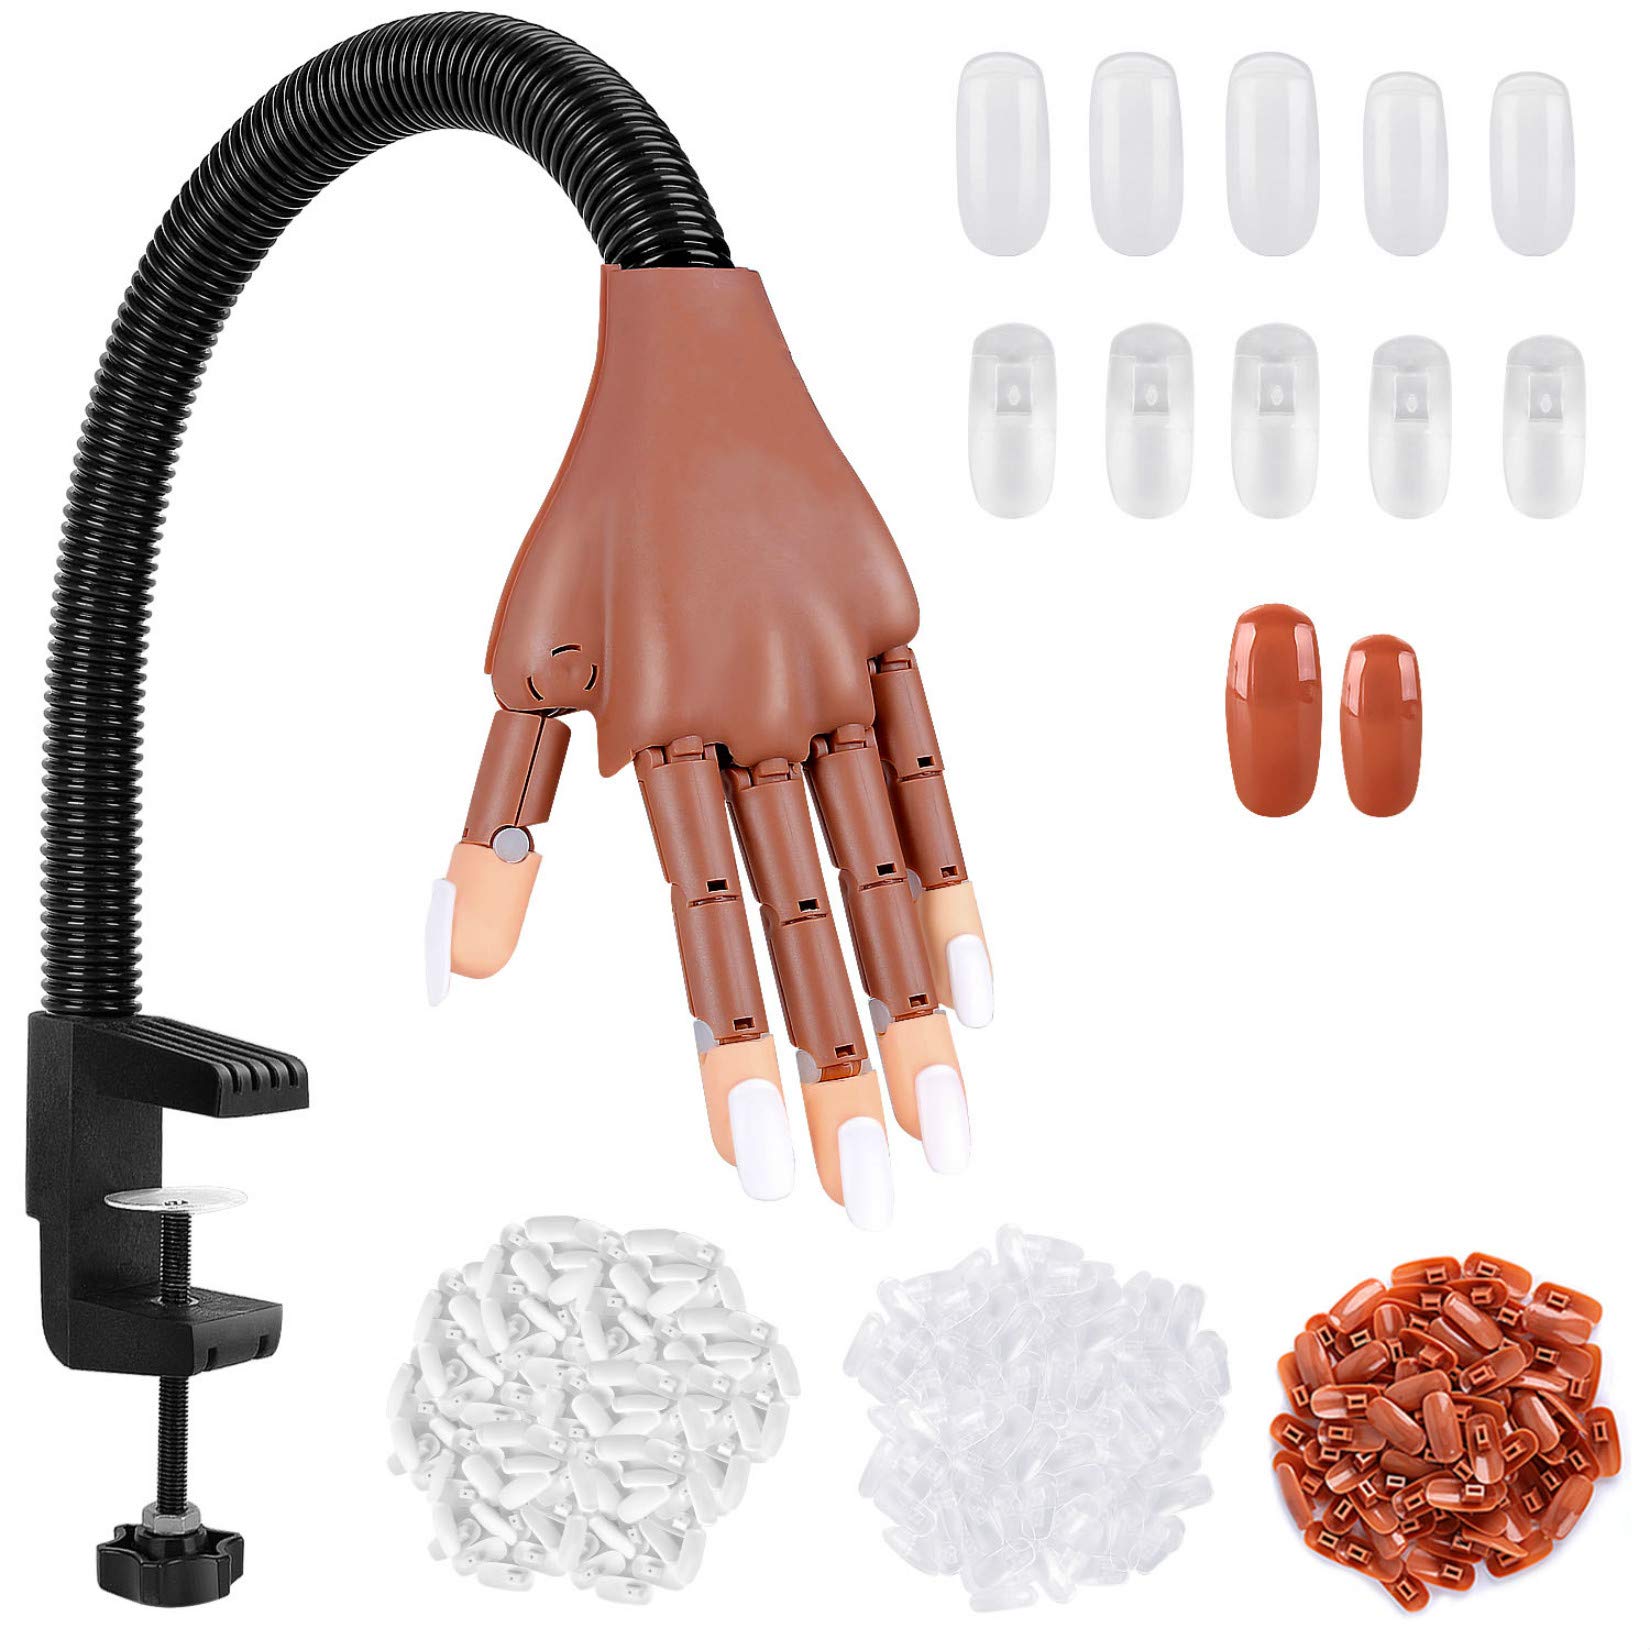 Nail Practice Hand For Acrylic Nails-flexible Nail Training Hand Kit, Fake  Mannequin Model Training Hand With 300 Pcs Nail Tips, Nail Files And C